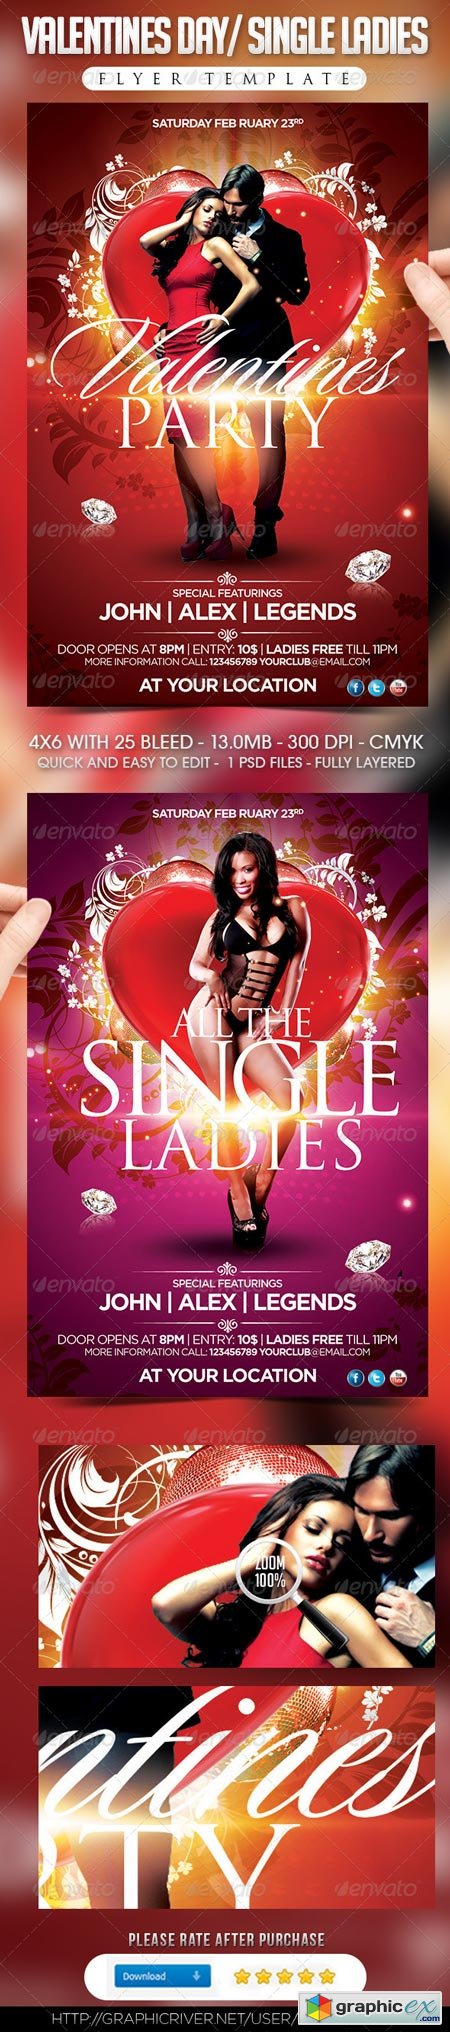 Valentines Day Single Ladies Flyer Template 3777520